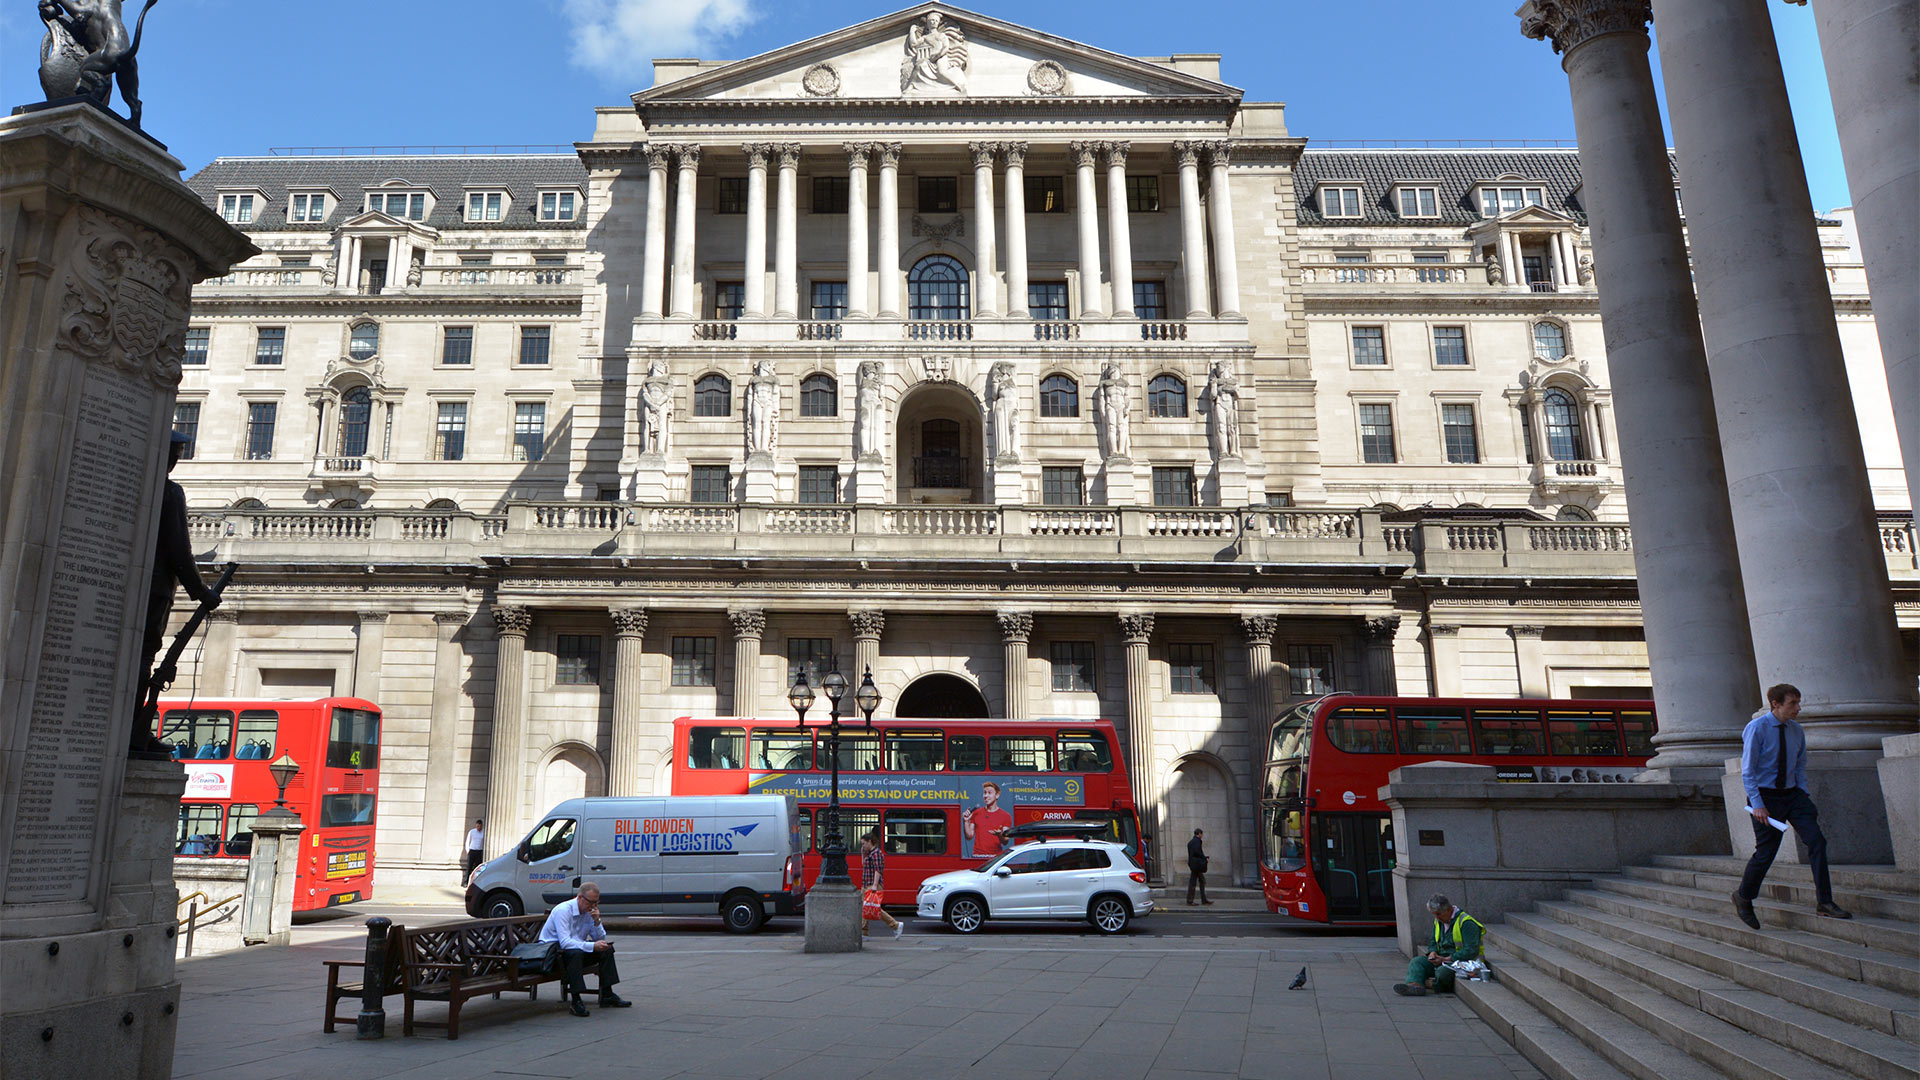 Bank of England | picture alliance / Newscom